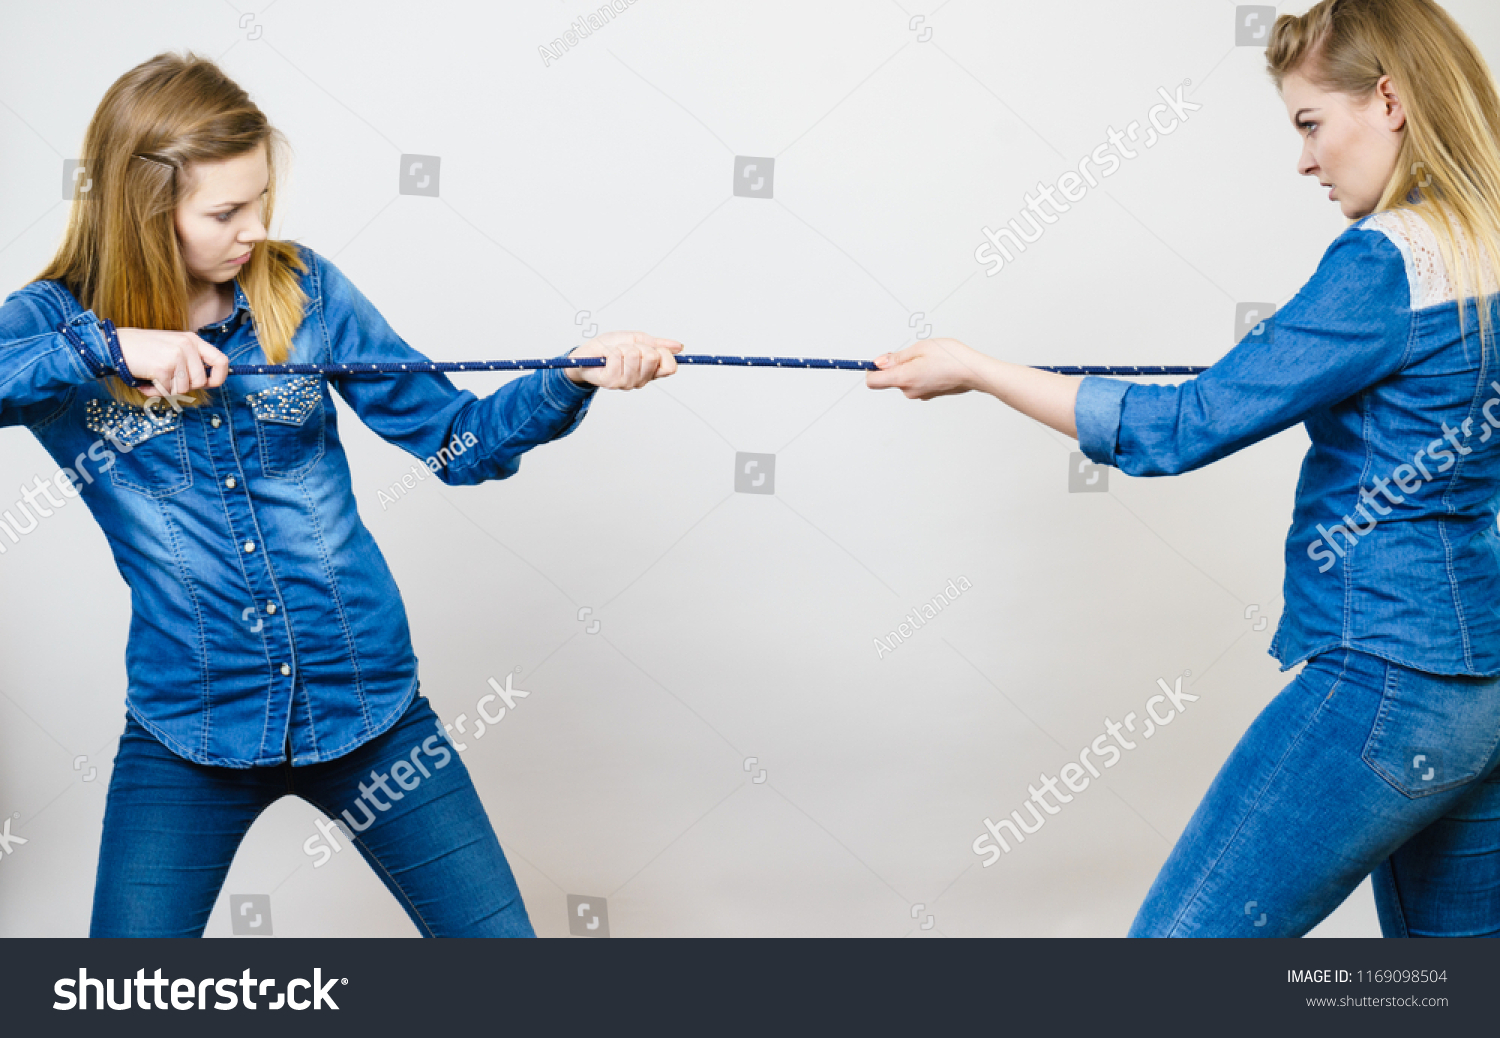 Two women having argue pulling rope being mad at each other. Bad rivalry relationship. #1169098504